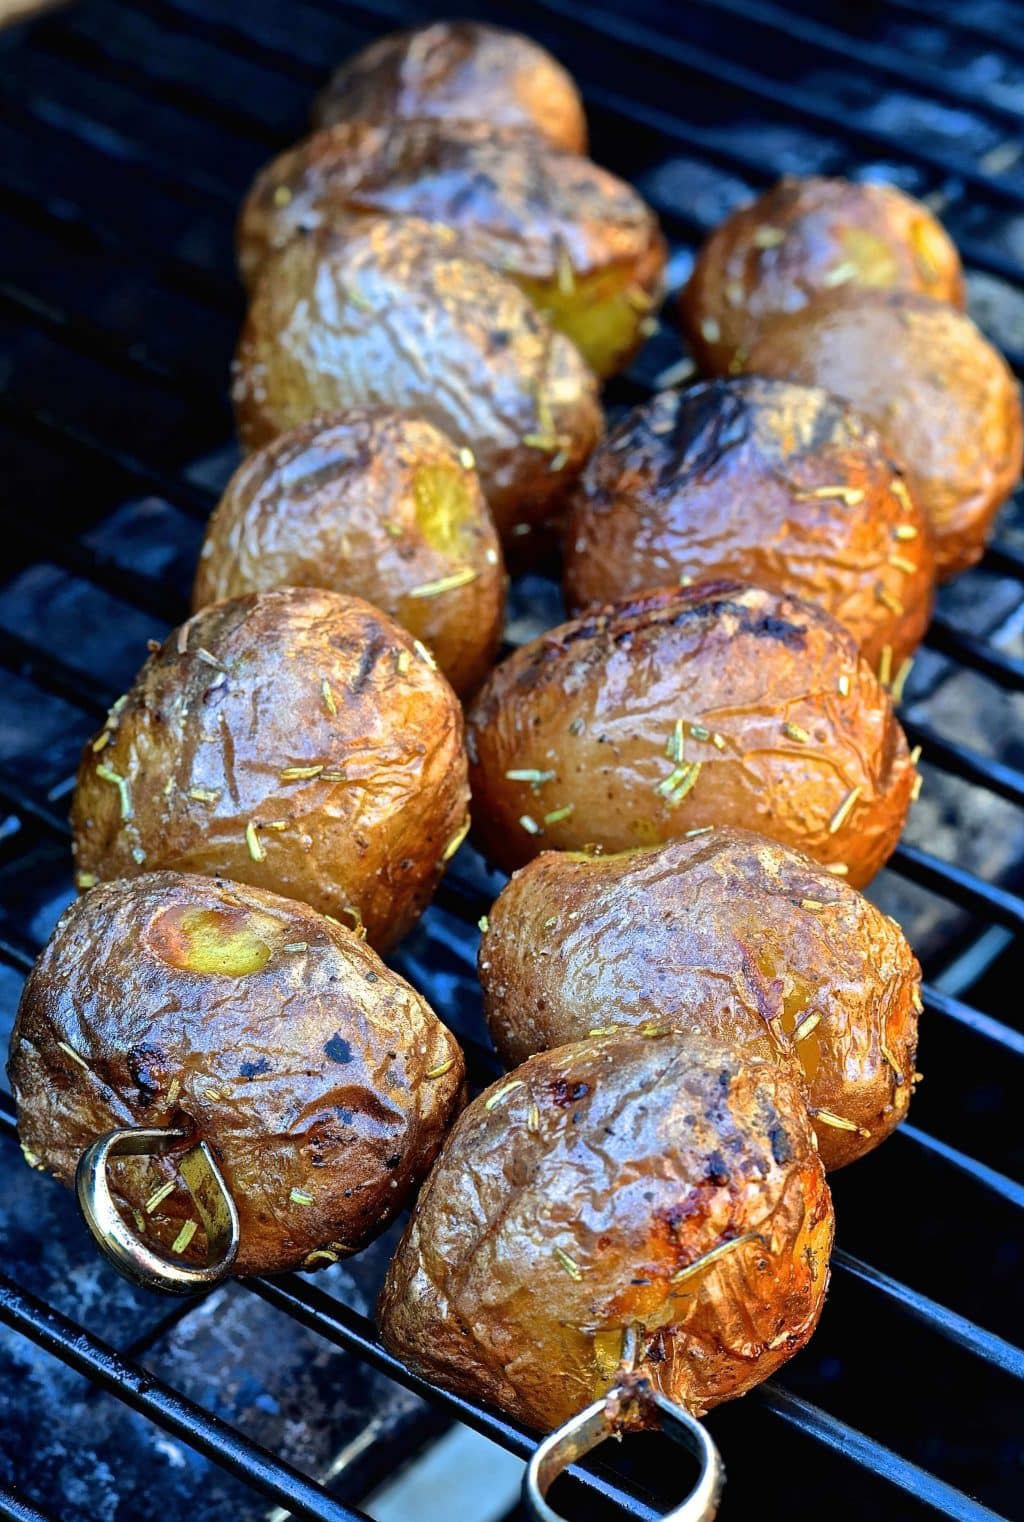 grilled-baby-potatoes-with-rosemary-1-copy.jpg